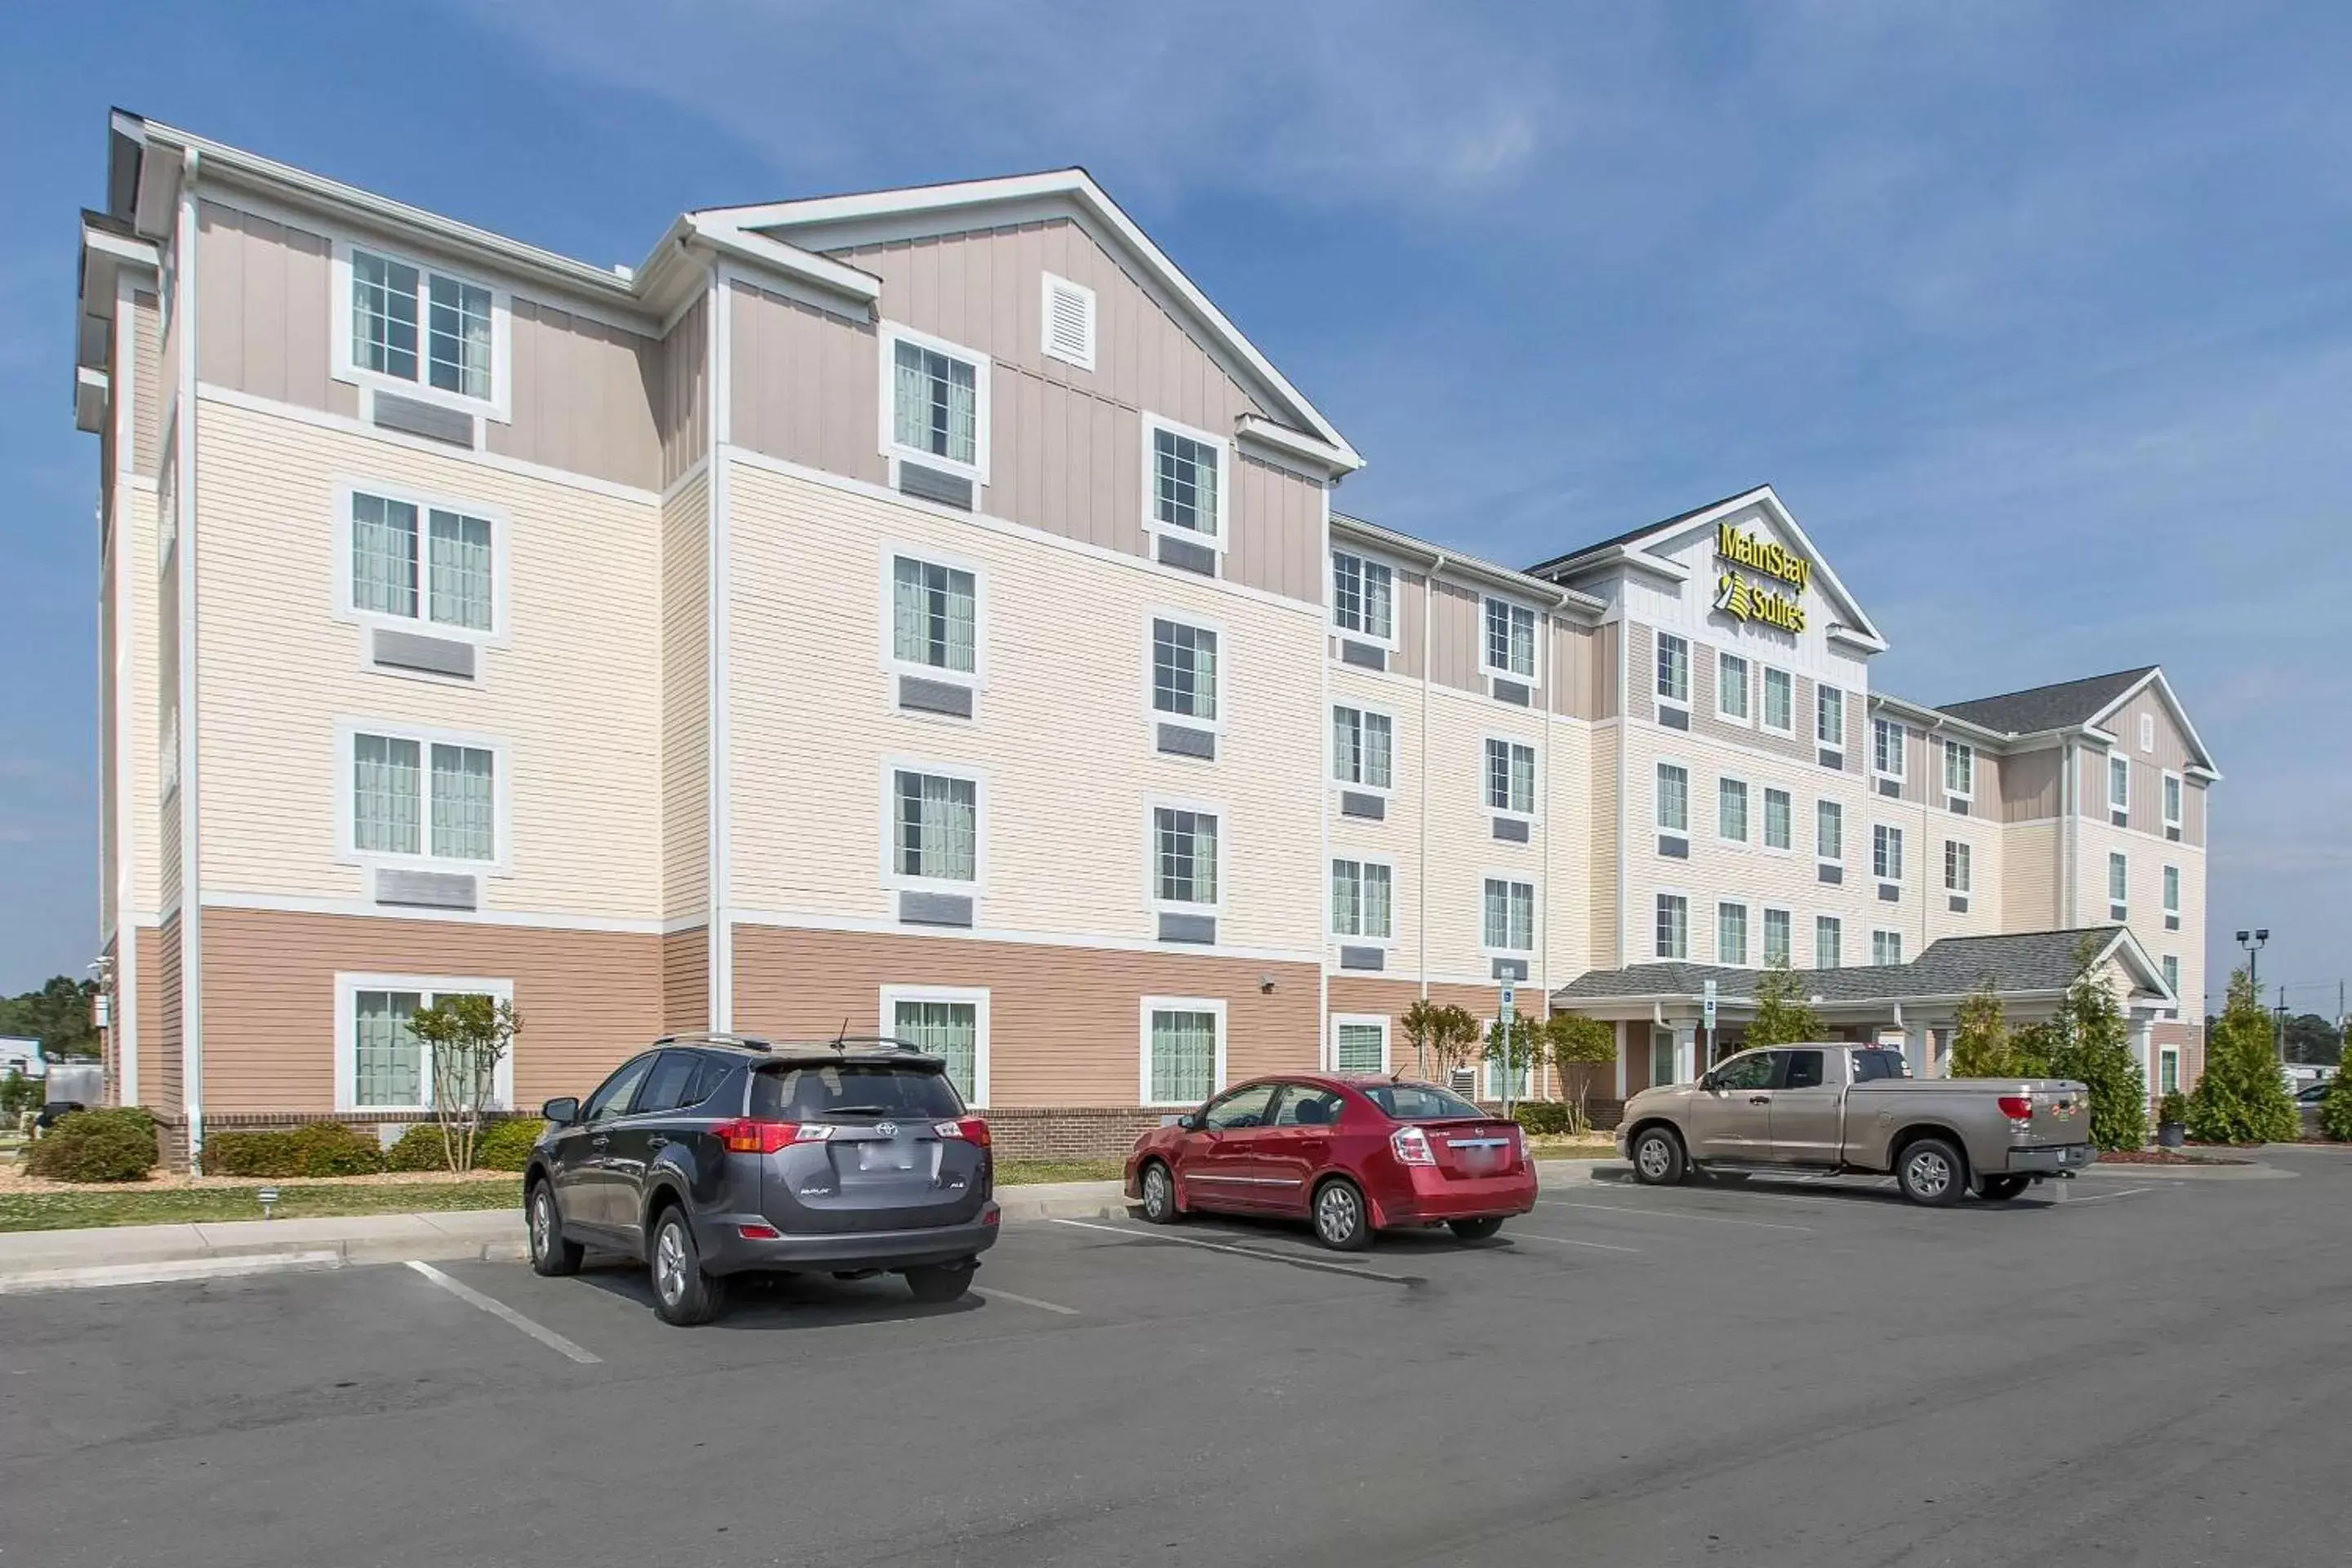 Property Building in MainStay Suites Jacksonville near Camp Lejeune